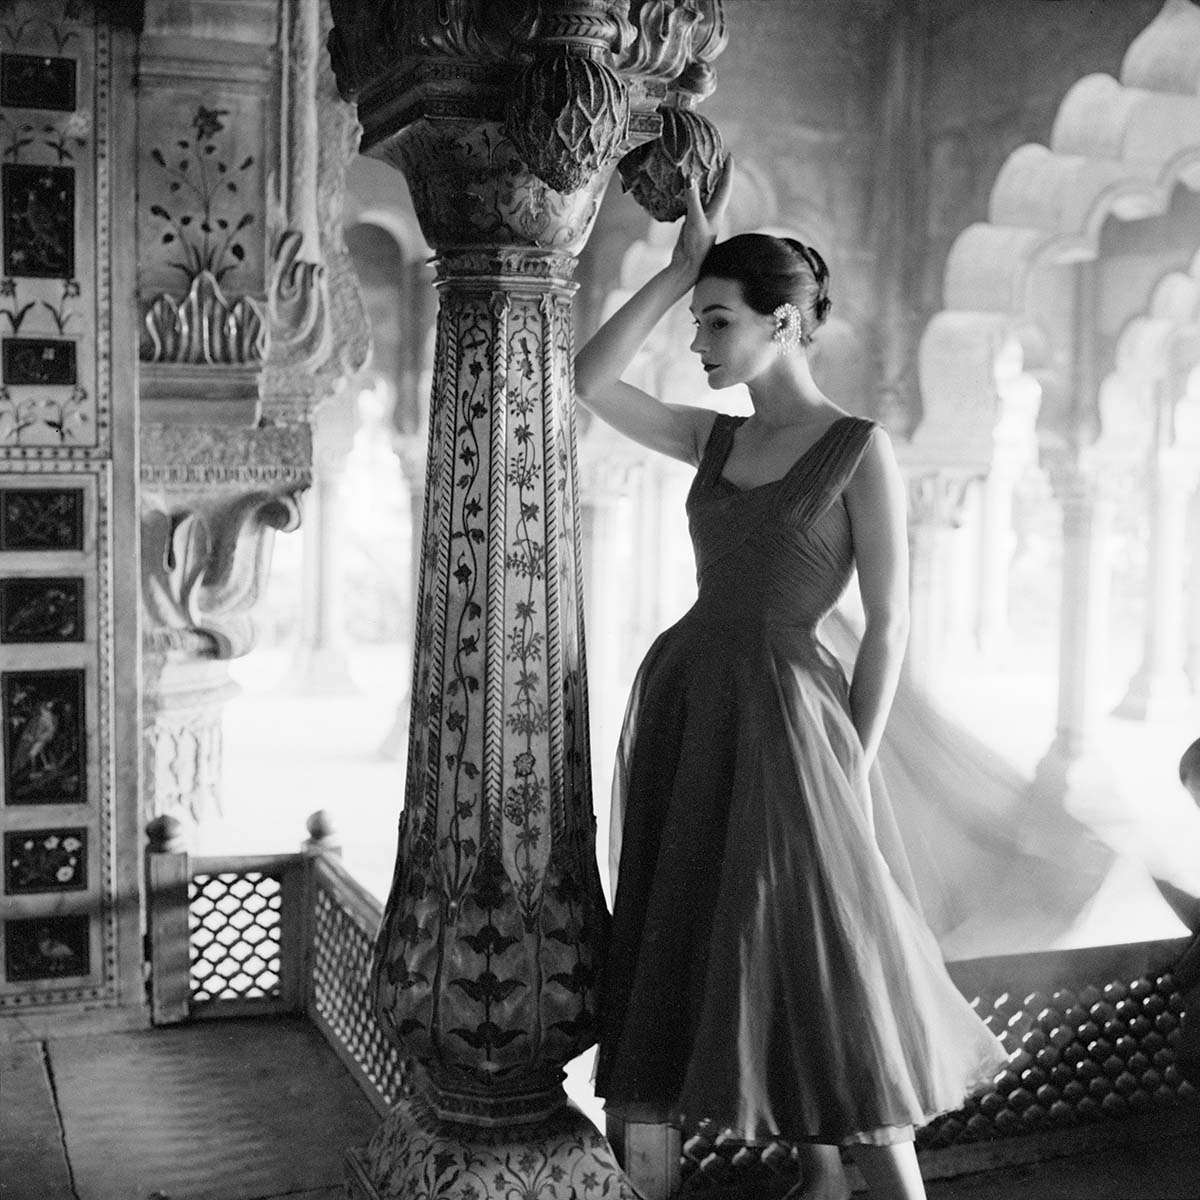 A photograph of a model in an evening dress standing by an inlaid column of the Red Fort in Delhi.